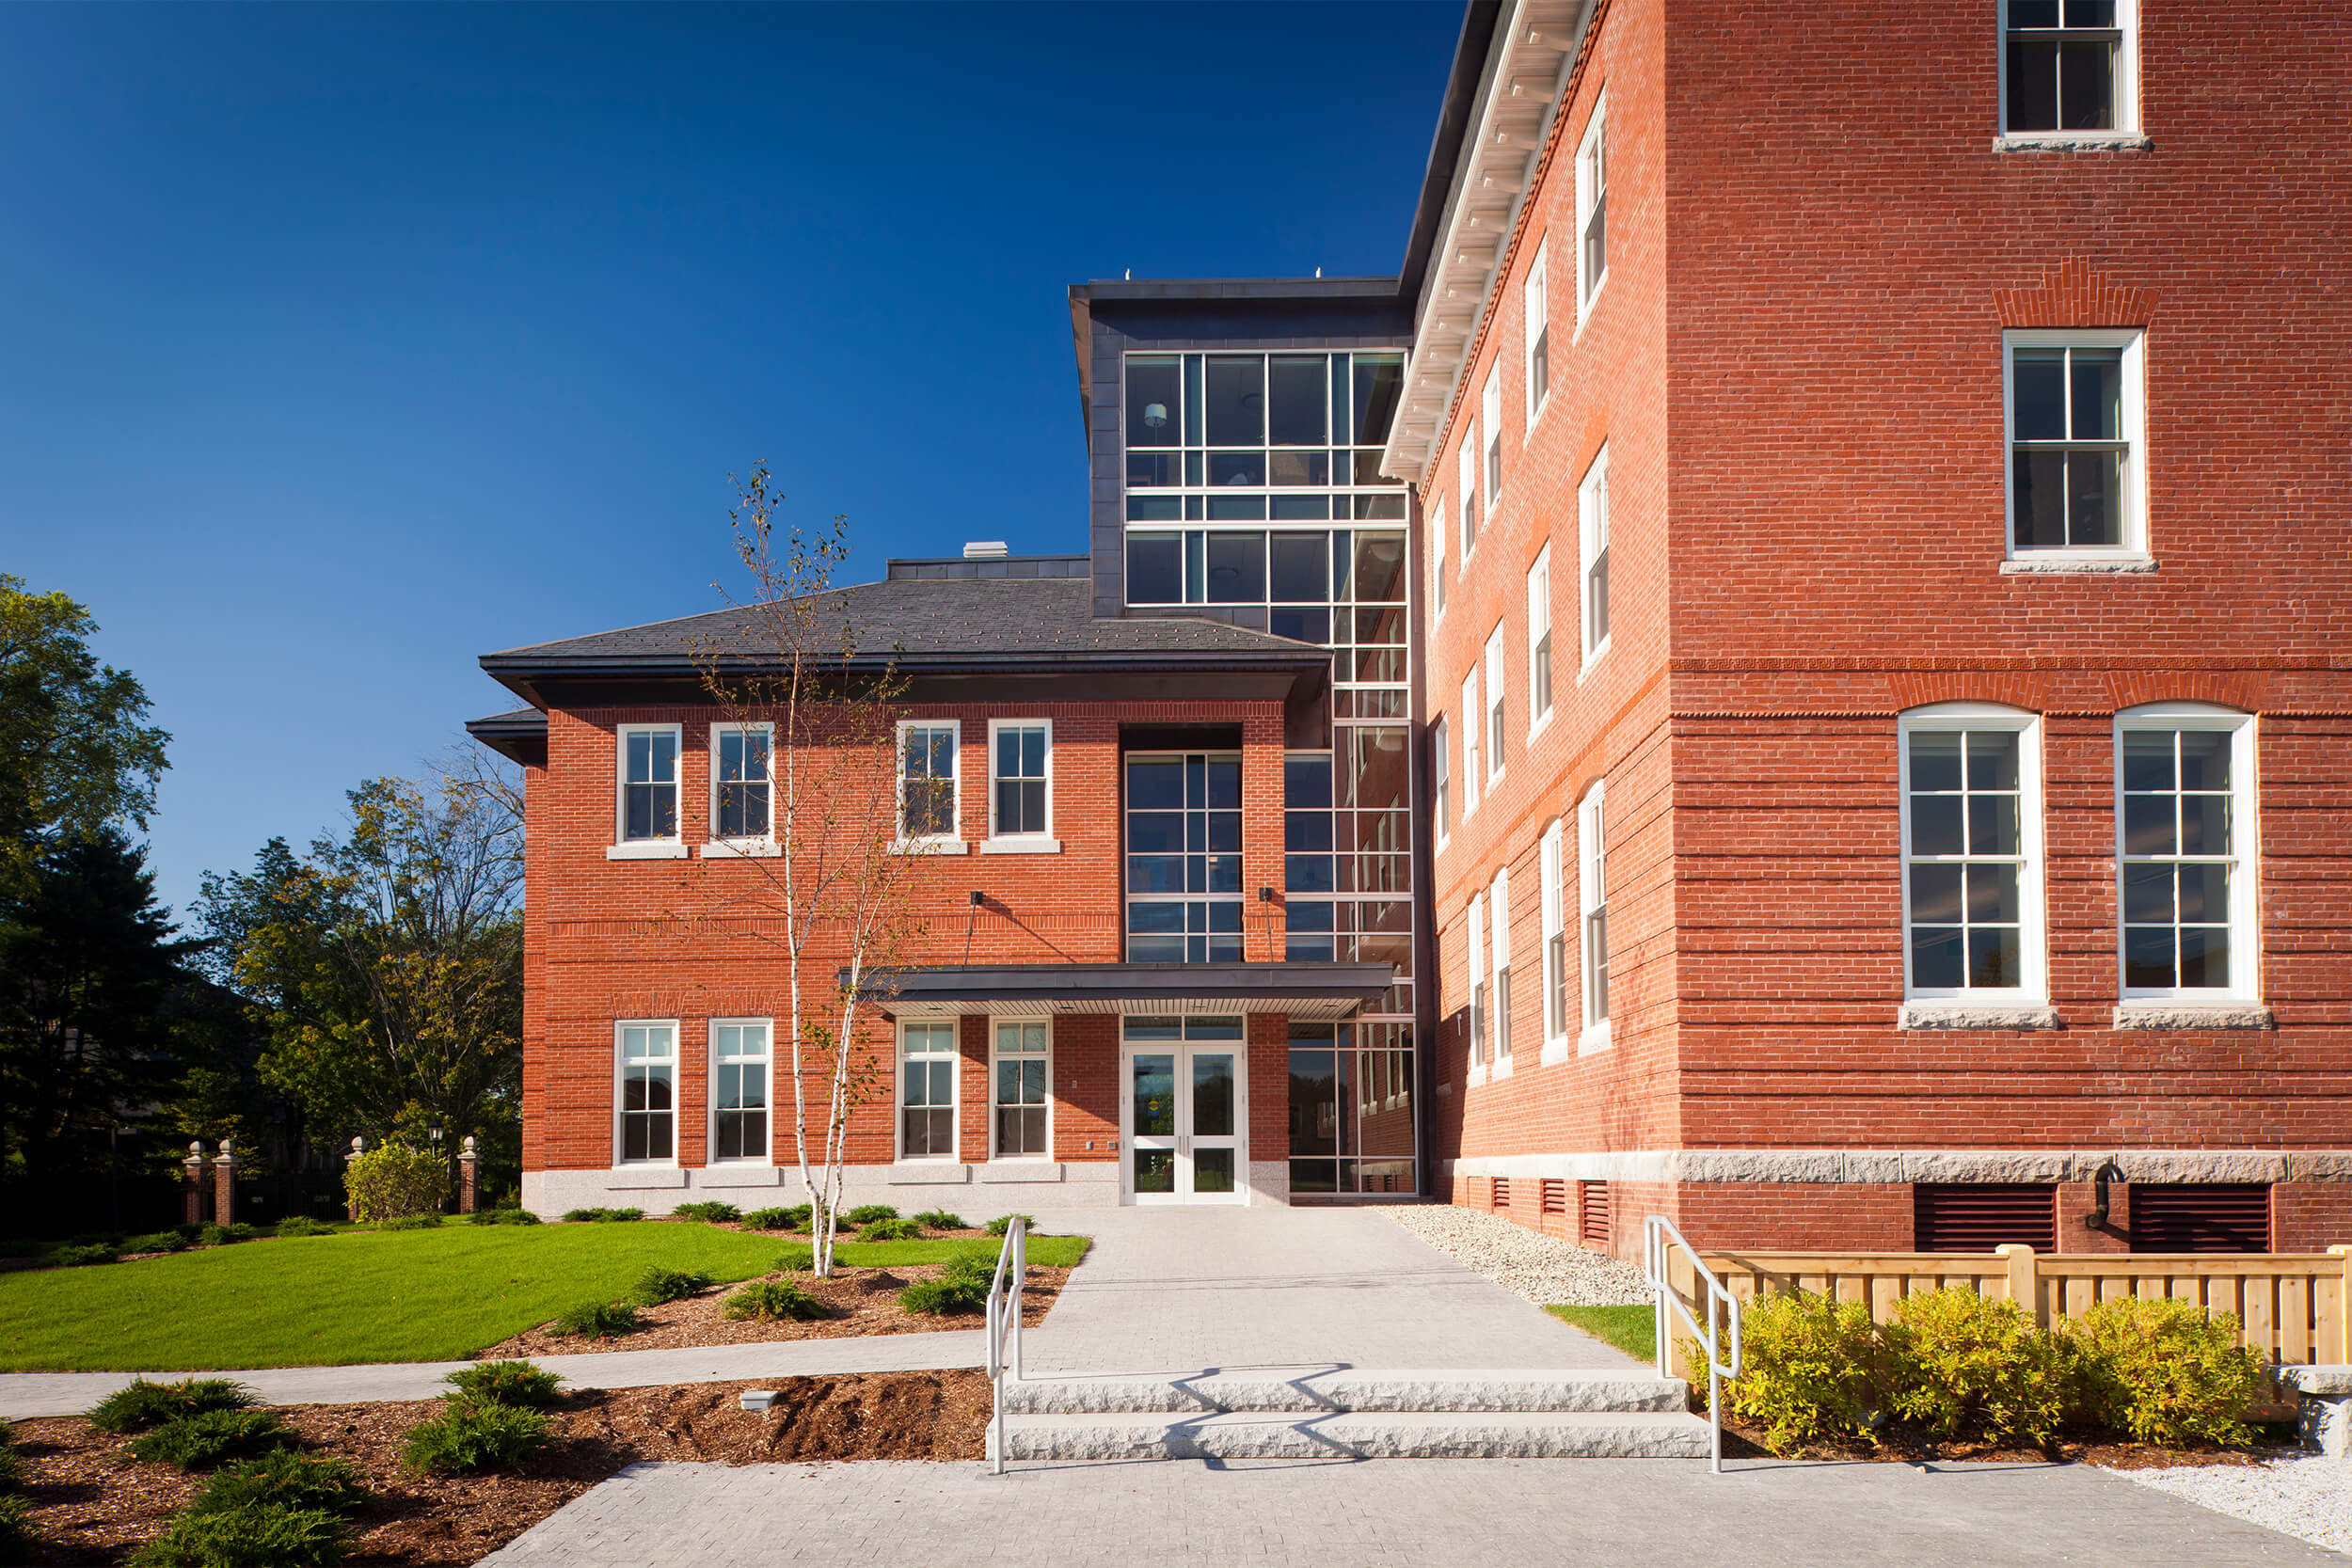 Exterior view of the entrance to Roger Williams Hall building at Bates College. A concrete walkway leads up to a small grass courtyard area by the entrance of the red brick building.